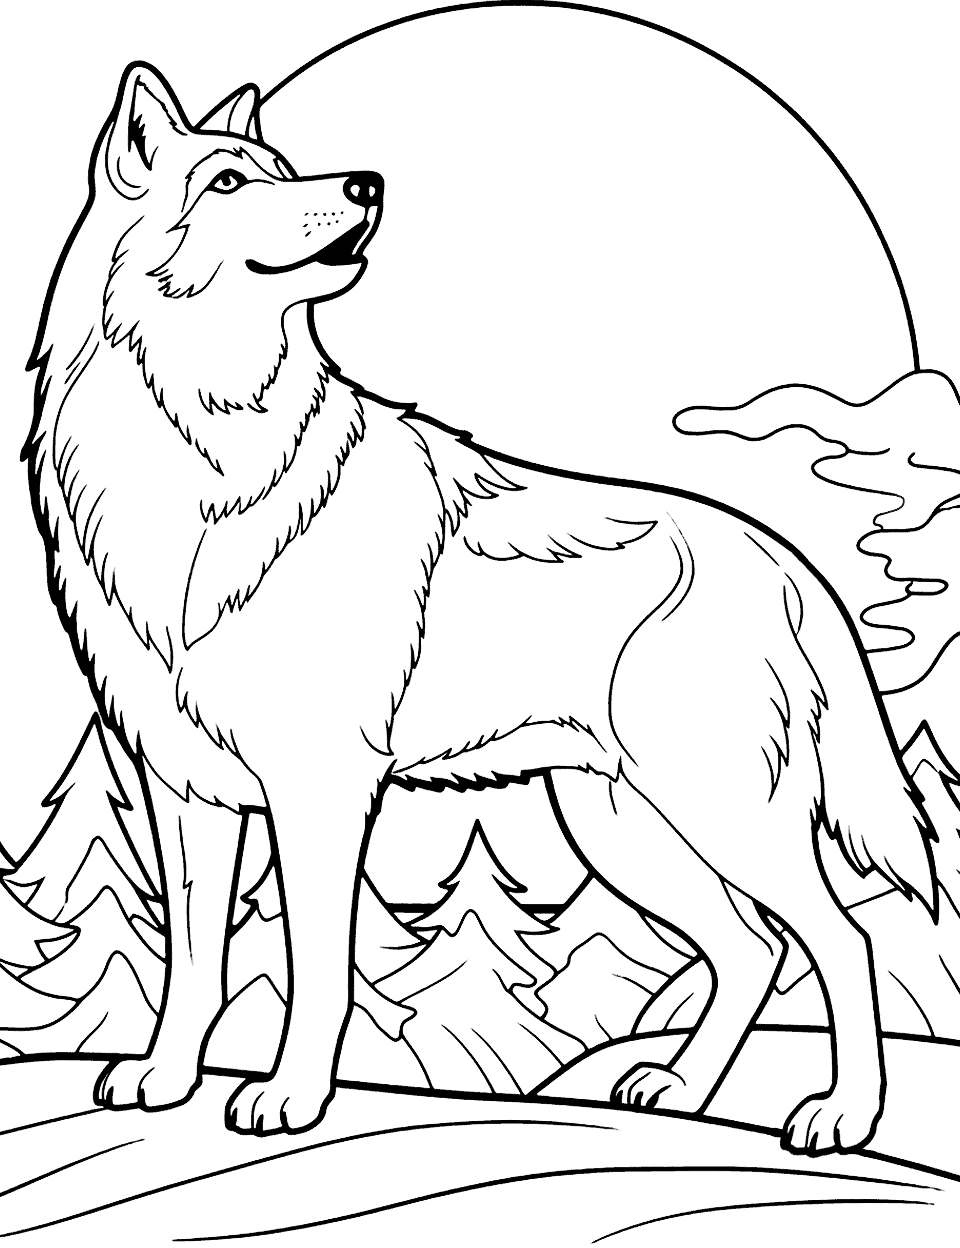 Wolf and the Aurora Borealis Coloring Page - A wolf howling beneath the shimmering colors of the Northern Lights.